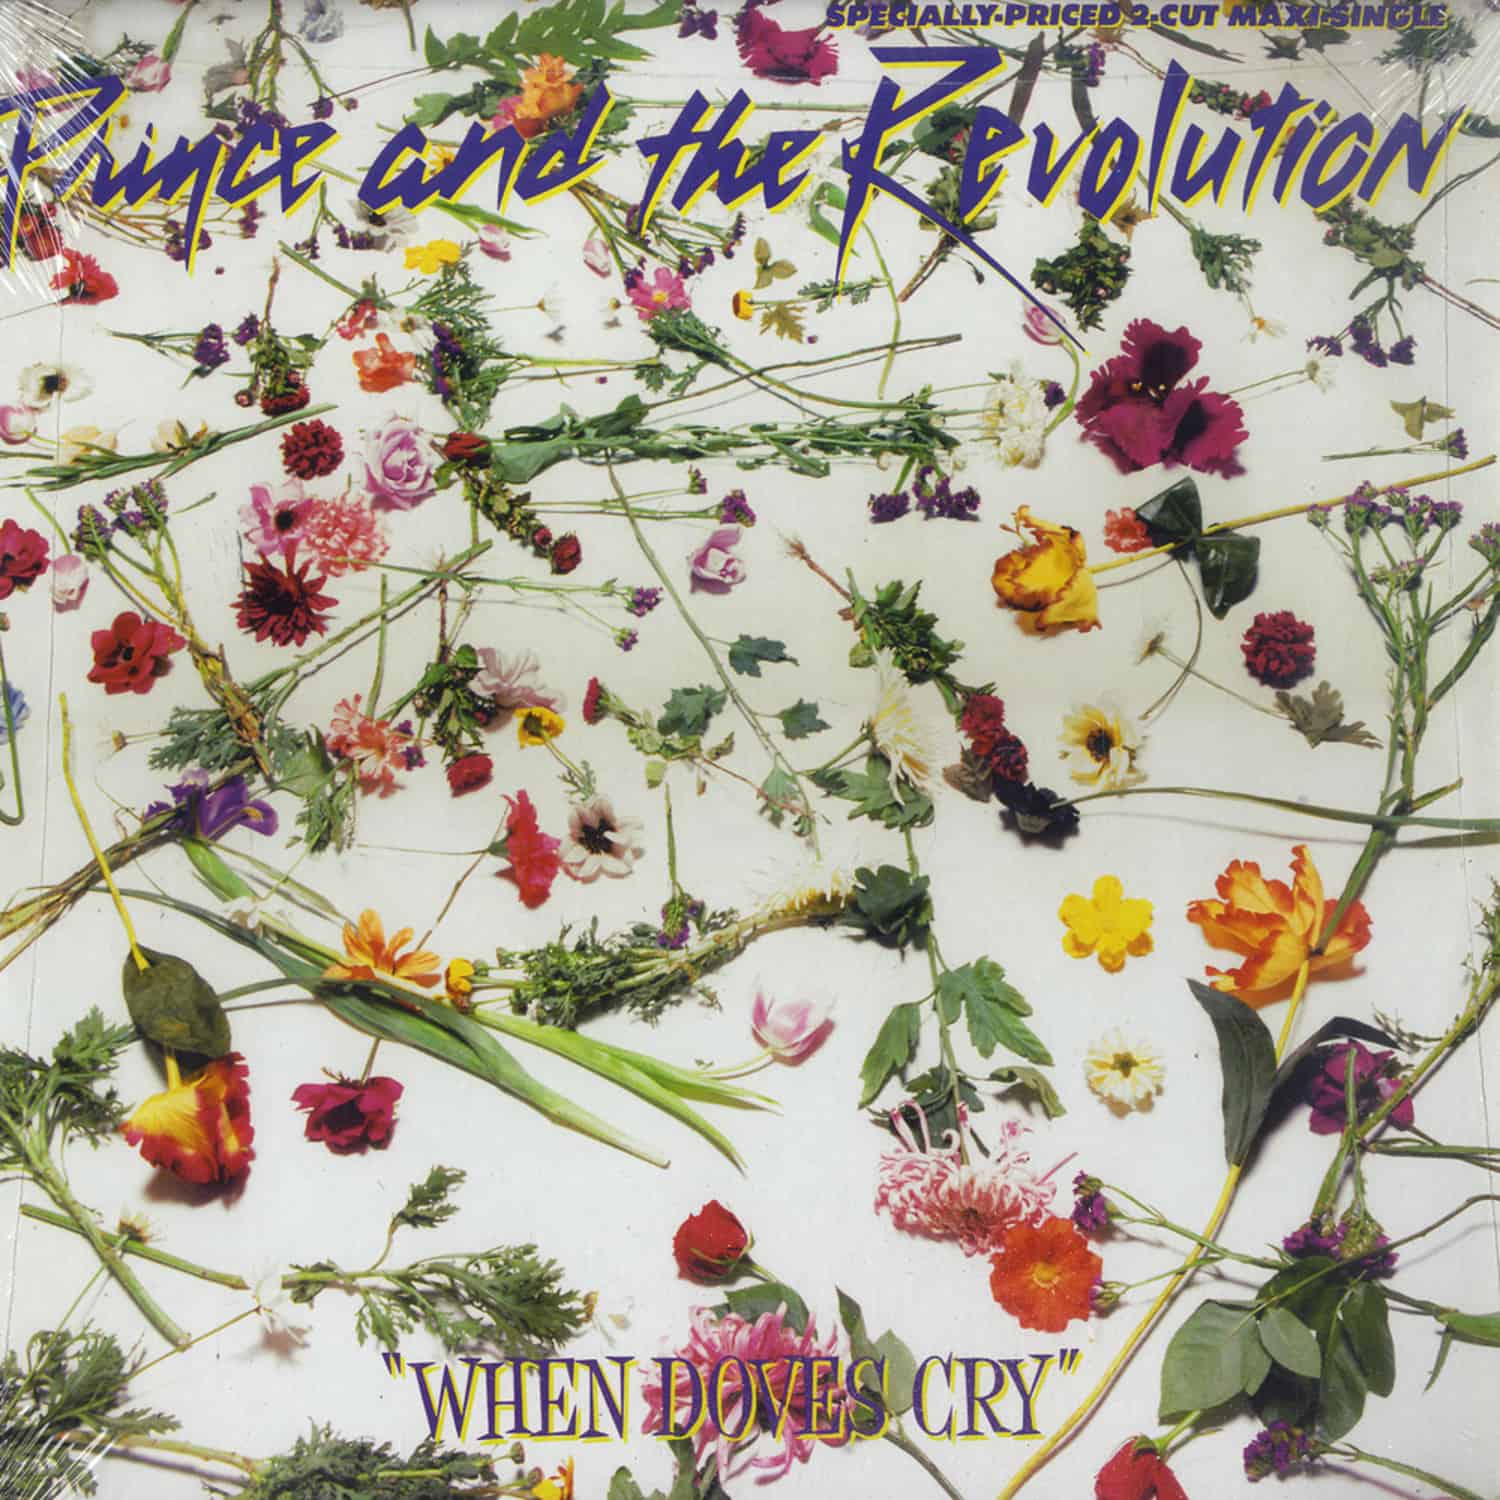 Prince & The Revolution - WHEN DOVES CRY / 17 DAYS